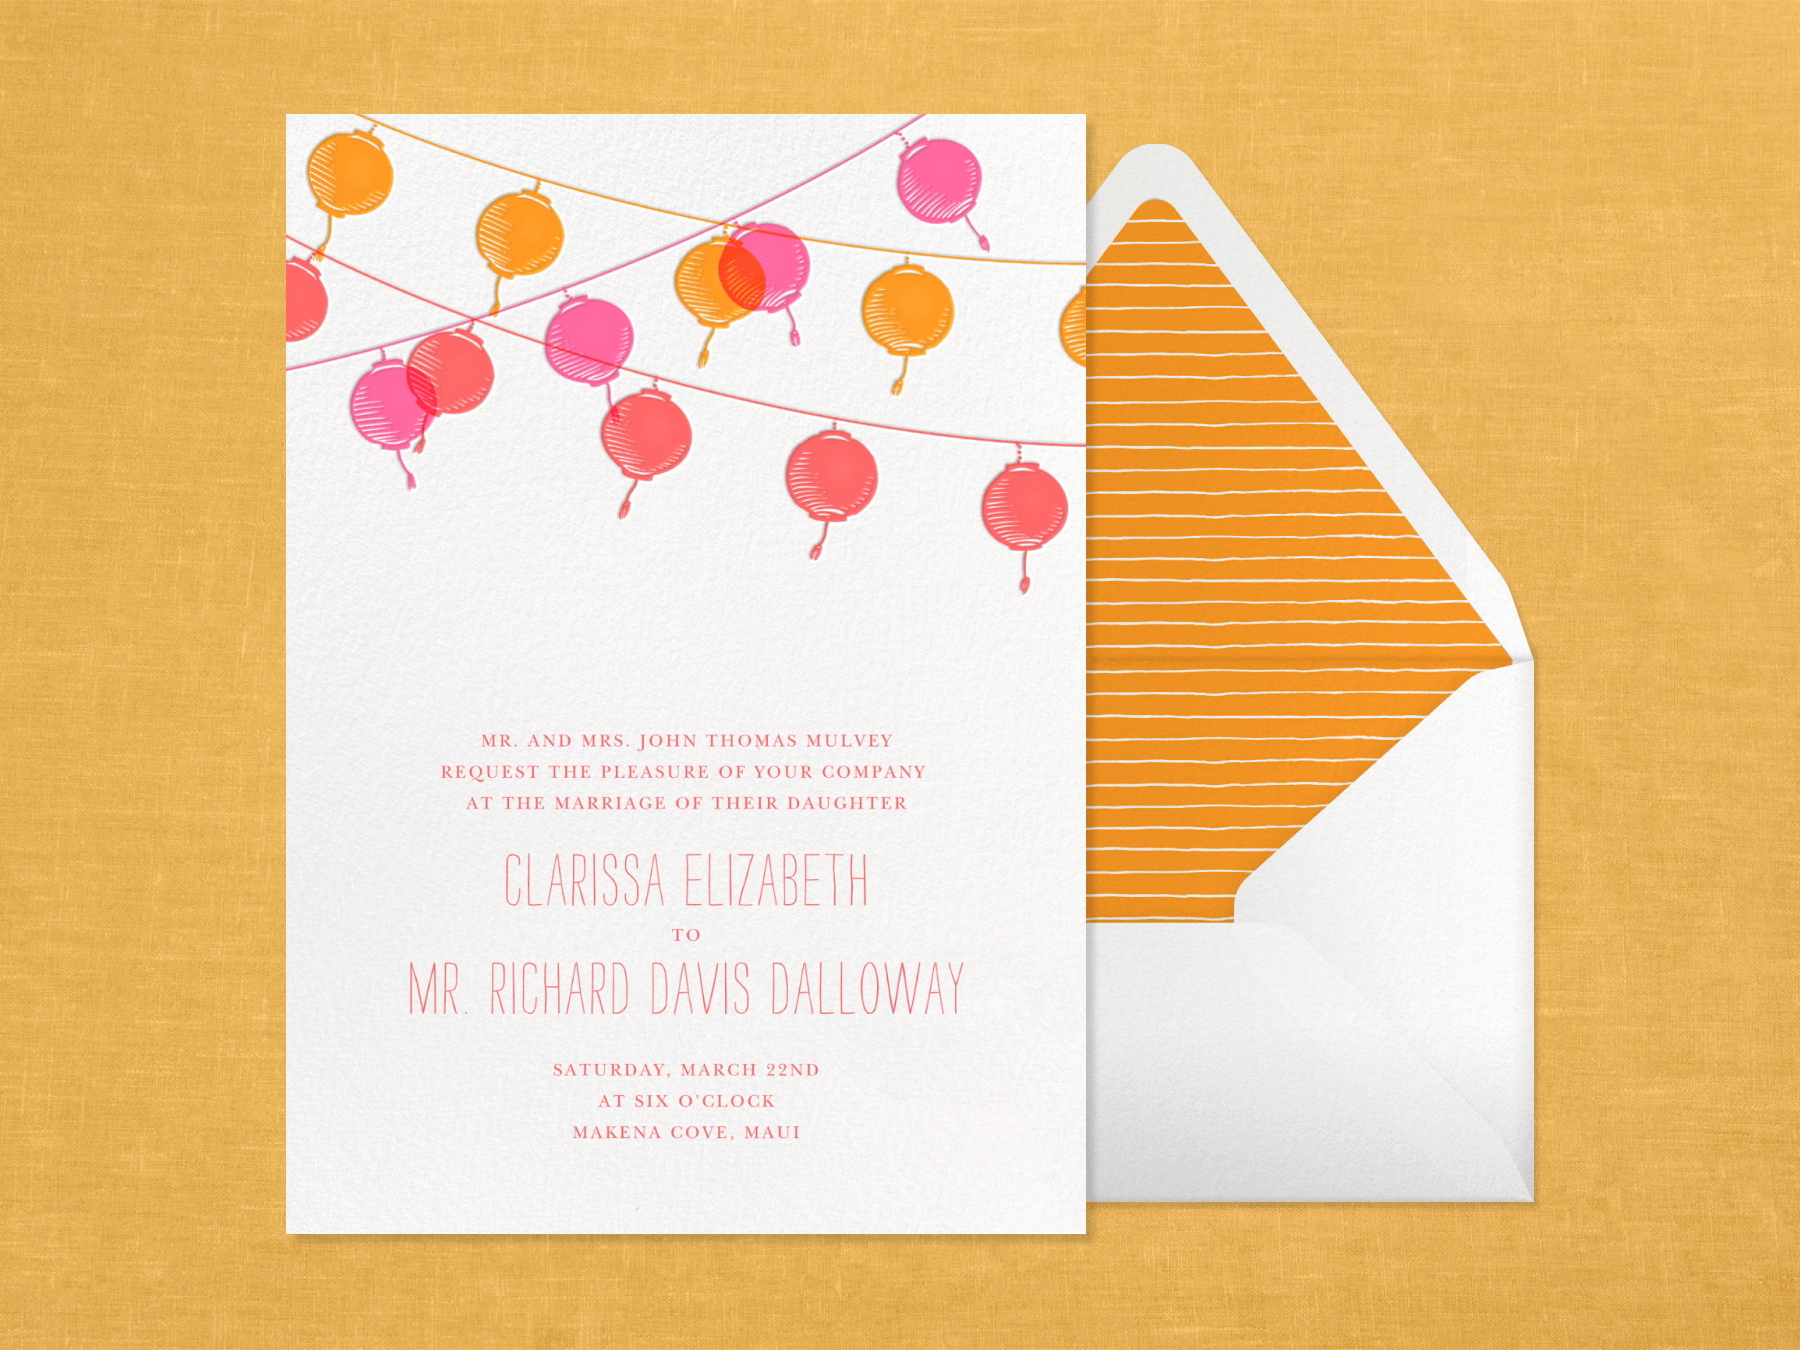 A wedding invitation with orange, pink, and red paper lanterns at the top.